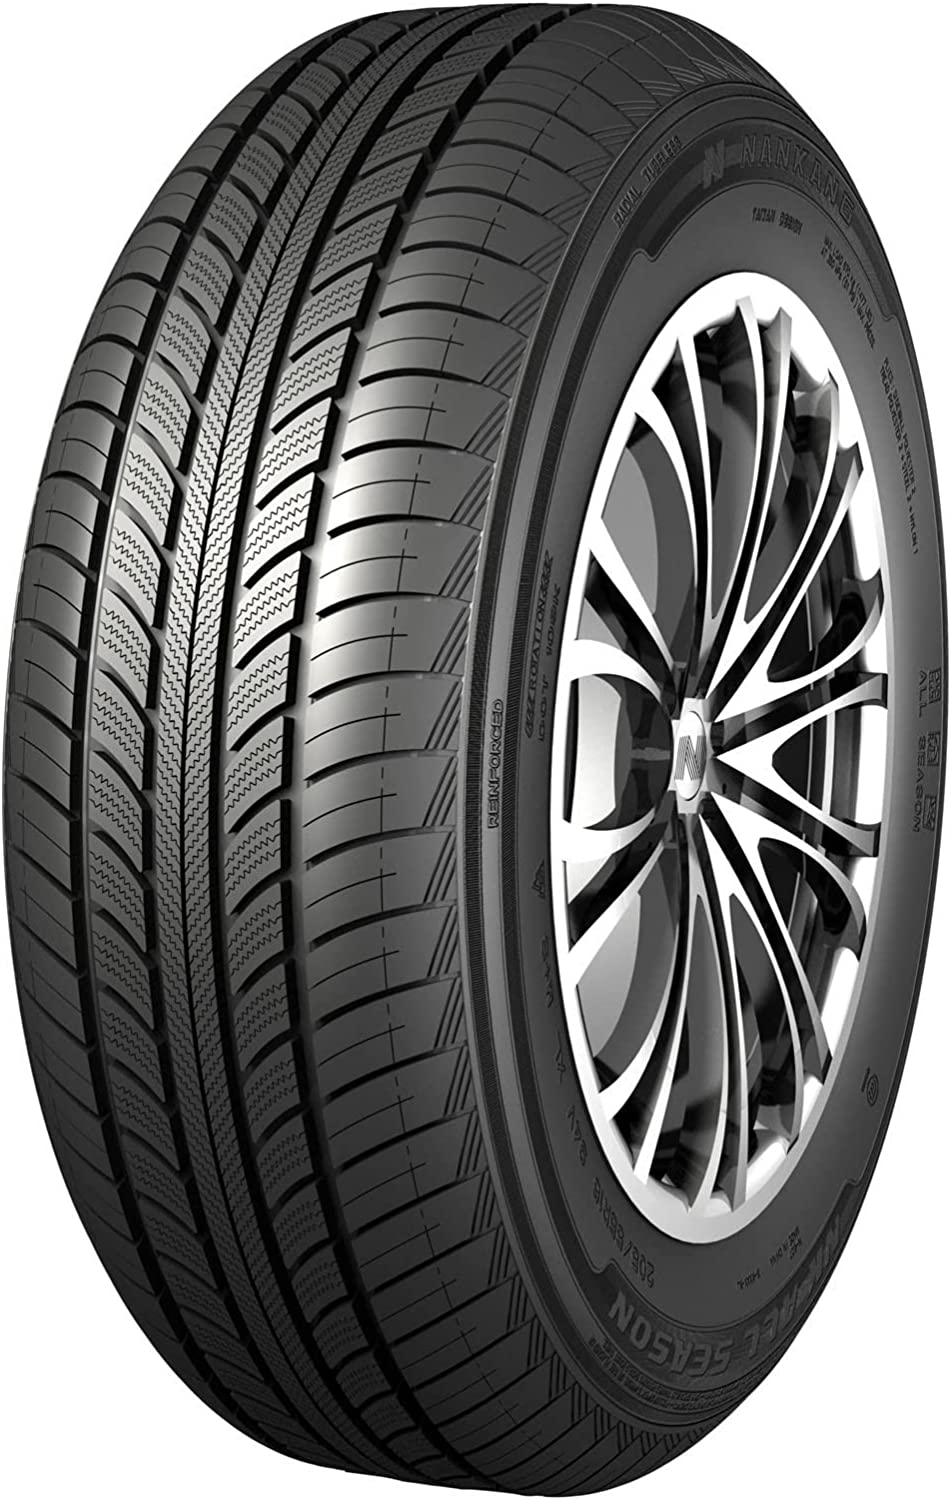 Gomme Nuove Nankang 165/65 R15 81T N-607+ M+S pneumatici nuovi All Season